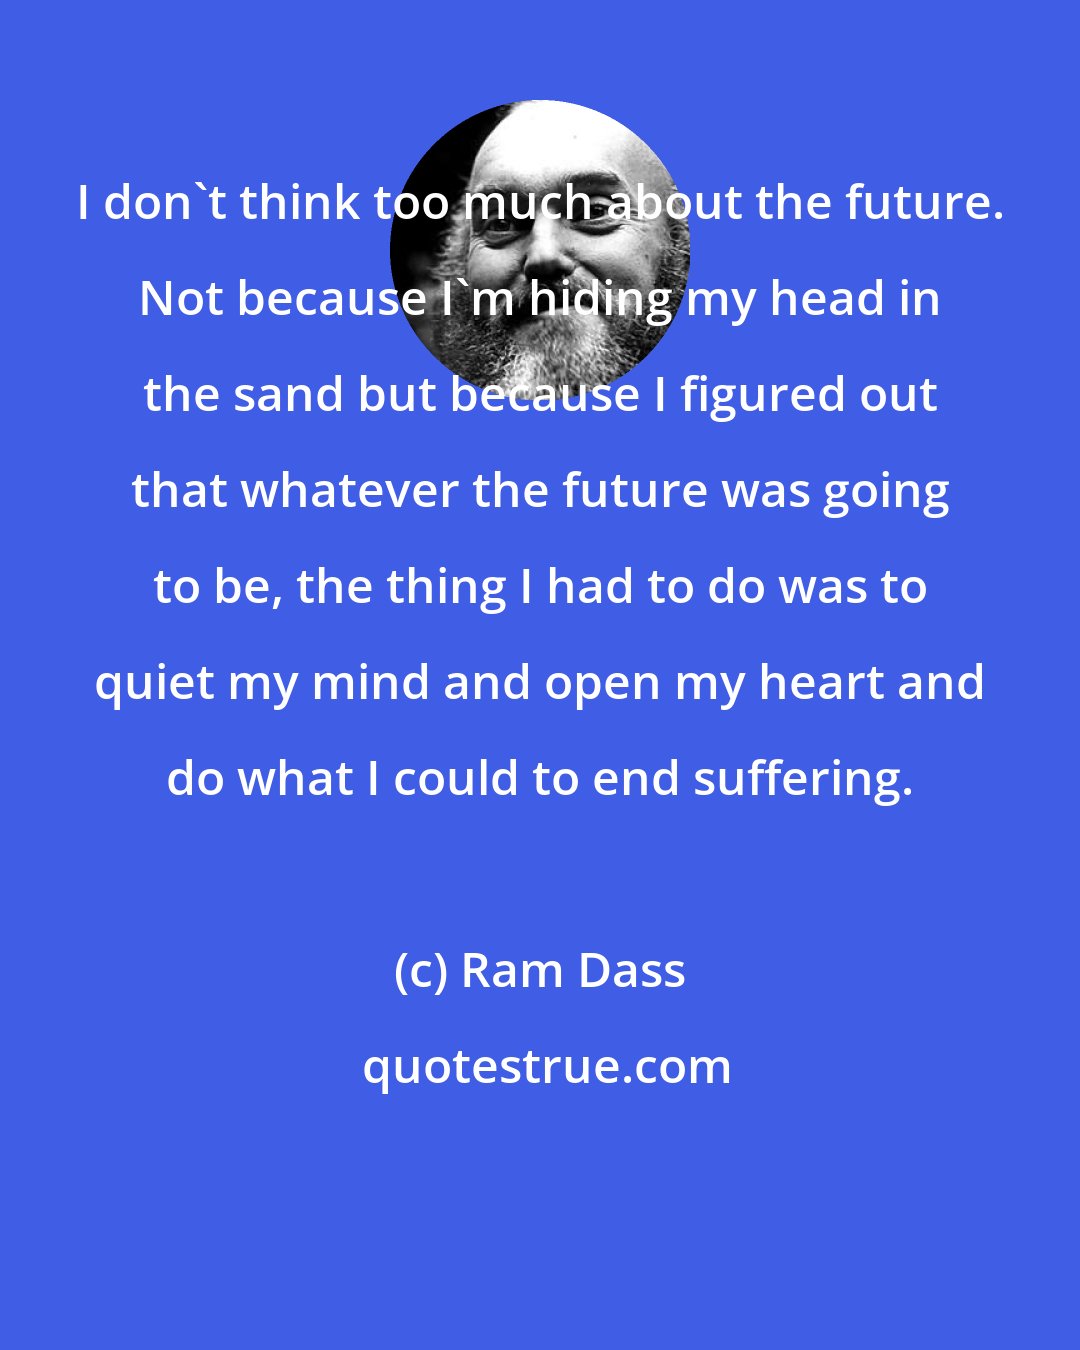 Ram Dass: I don't think too much about the future. Not because I'm hiding my head in the sand but because I figured out that whatever the future was going to be, the thing I had to do was to quiet my mind and open my heart and do what I could to end suffering.